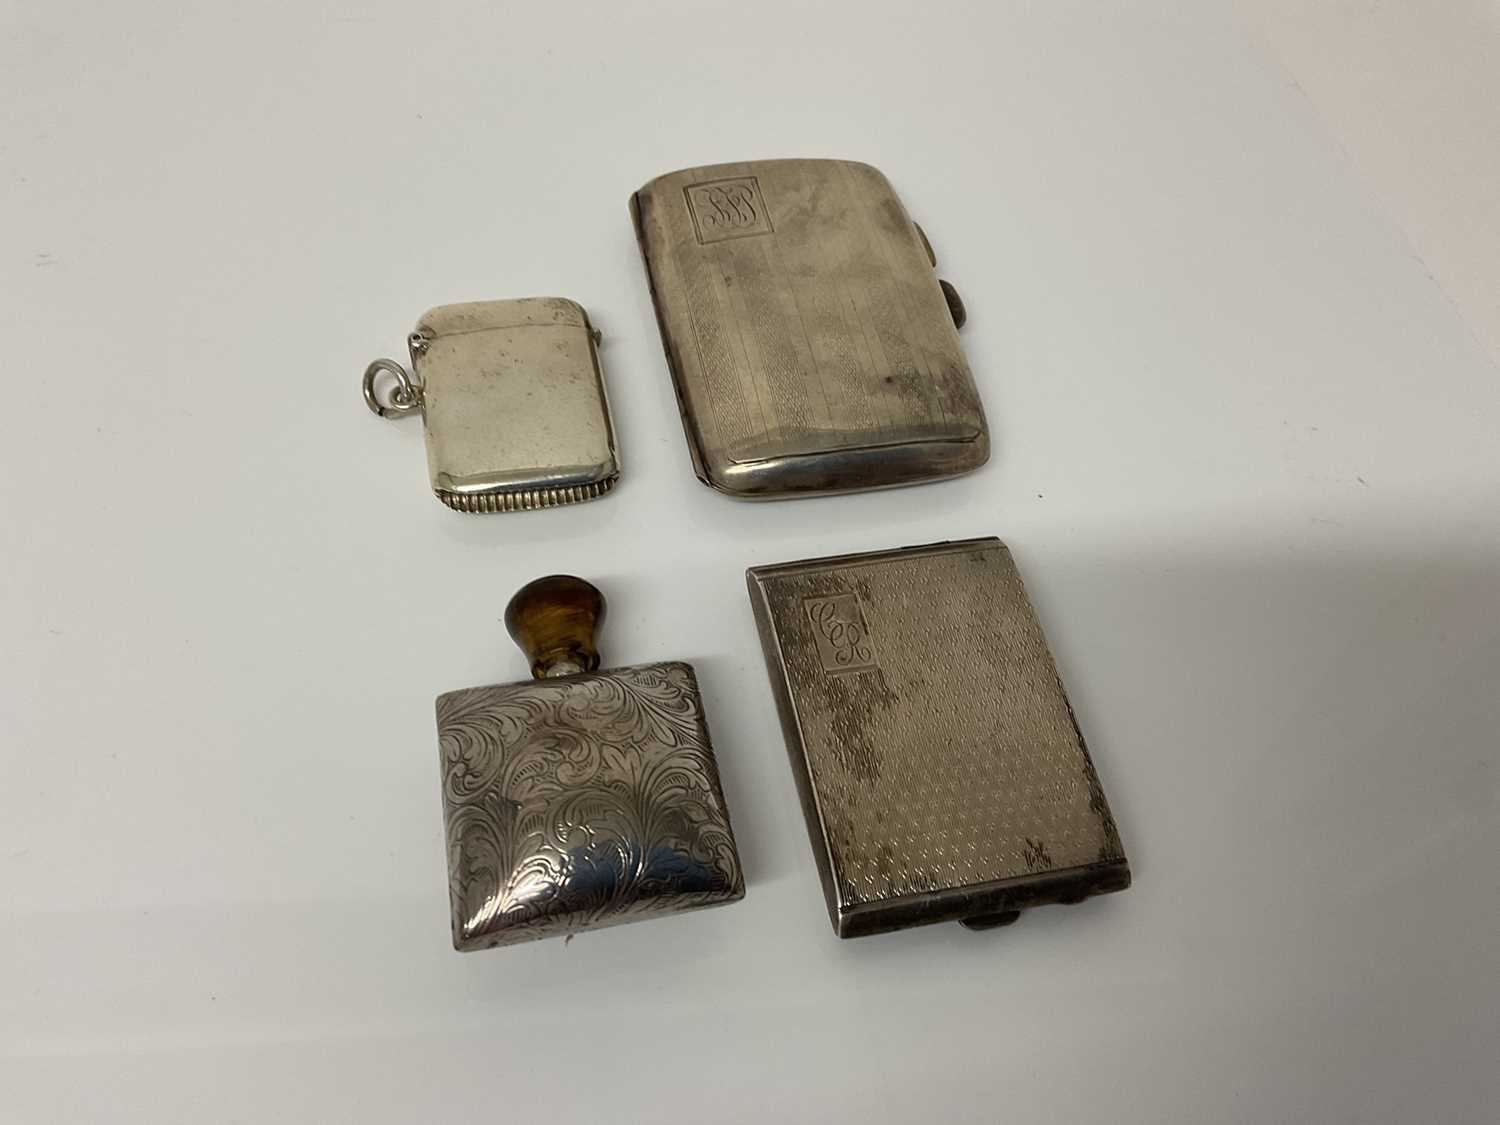 Lot 42 - George silver cigarette case with engine turned decoration, (Birmingham 1924), together with a silver match book holder, (Birmingham 1927), a silver Vesta case (Birmingham 1912) and a white metal s...